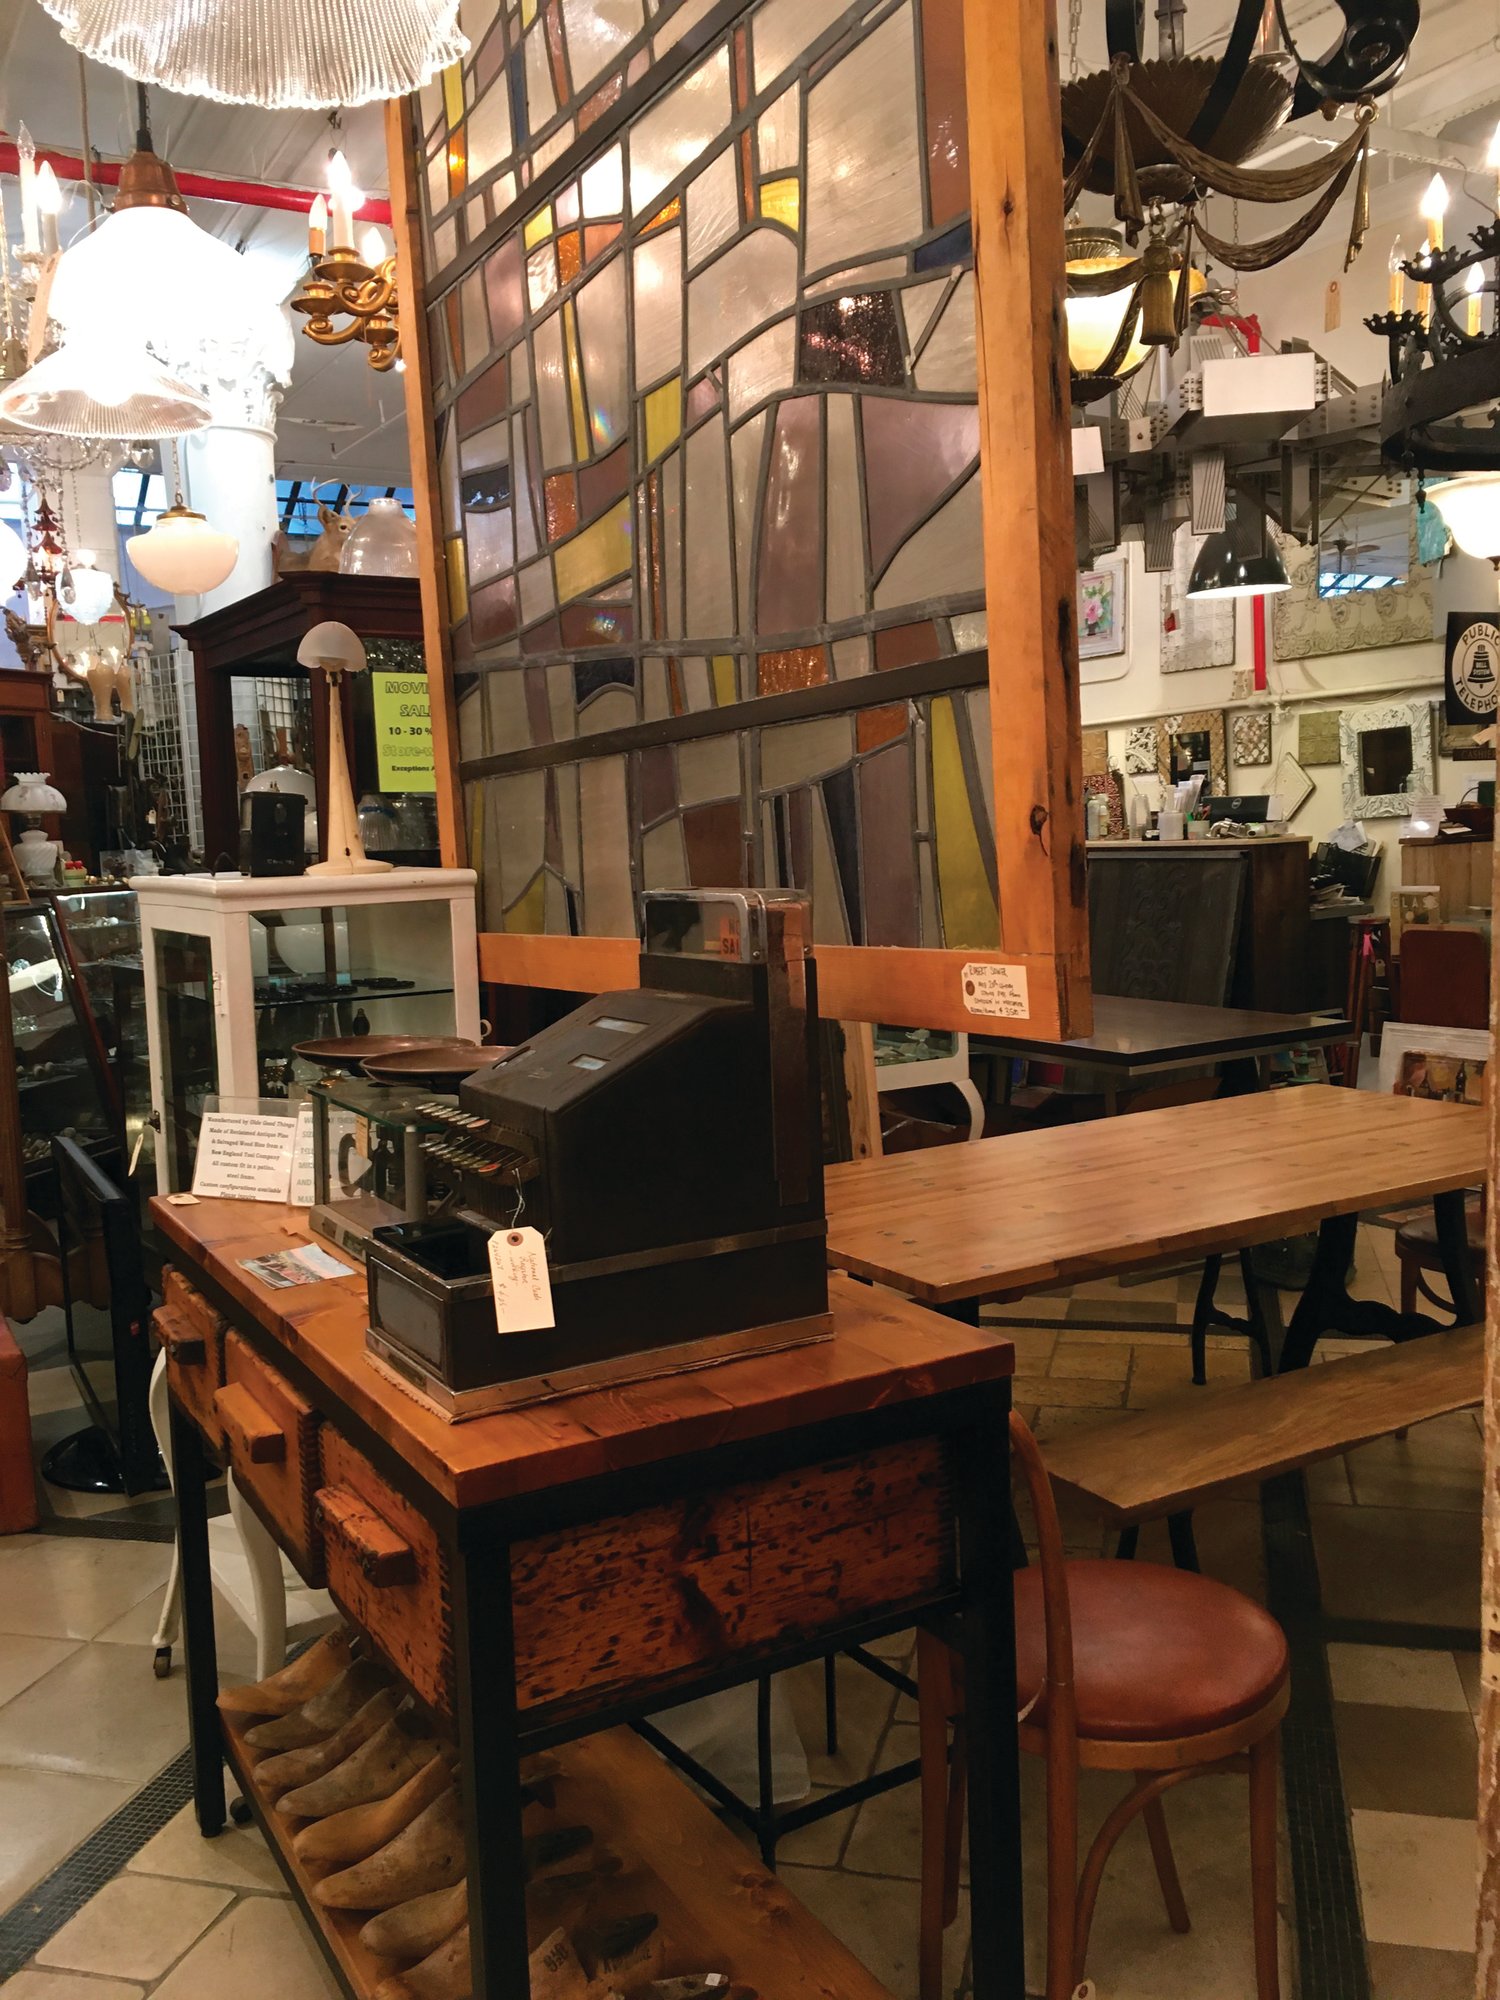 Seen are various salvaged items for sale at Olde Good Things salvage store in New York. Two of the hottest trends in home decor are sustainability and authenticity.